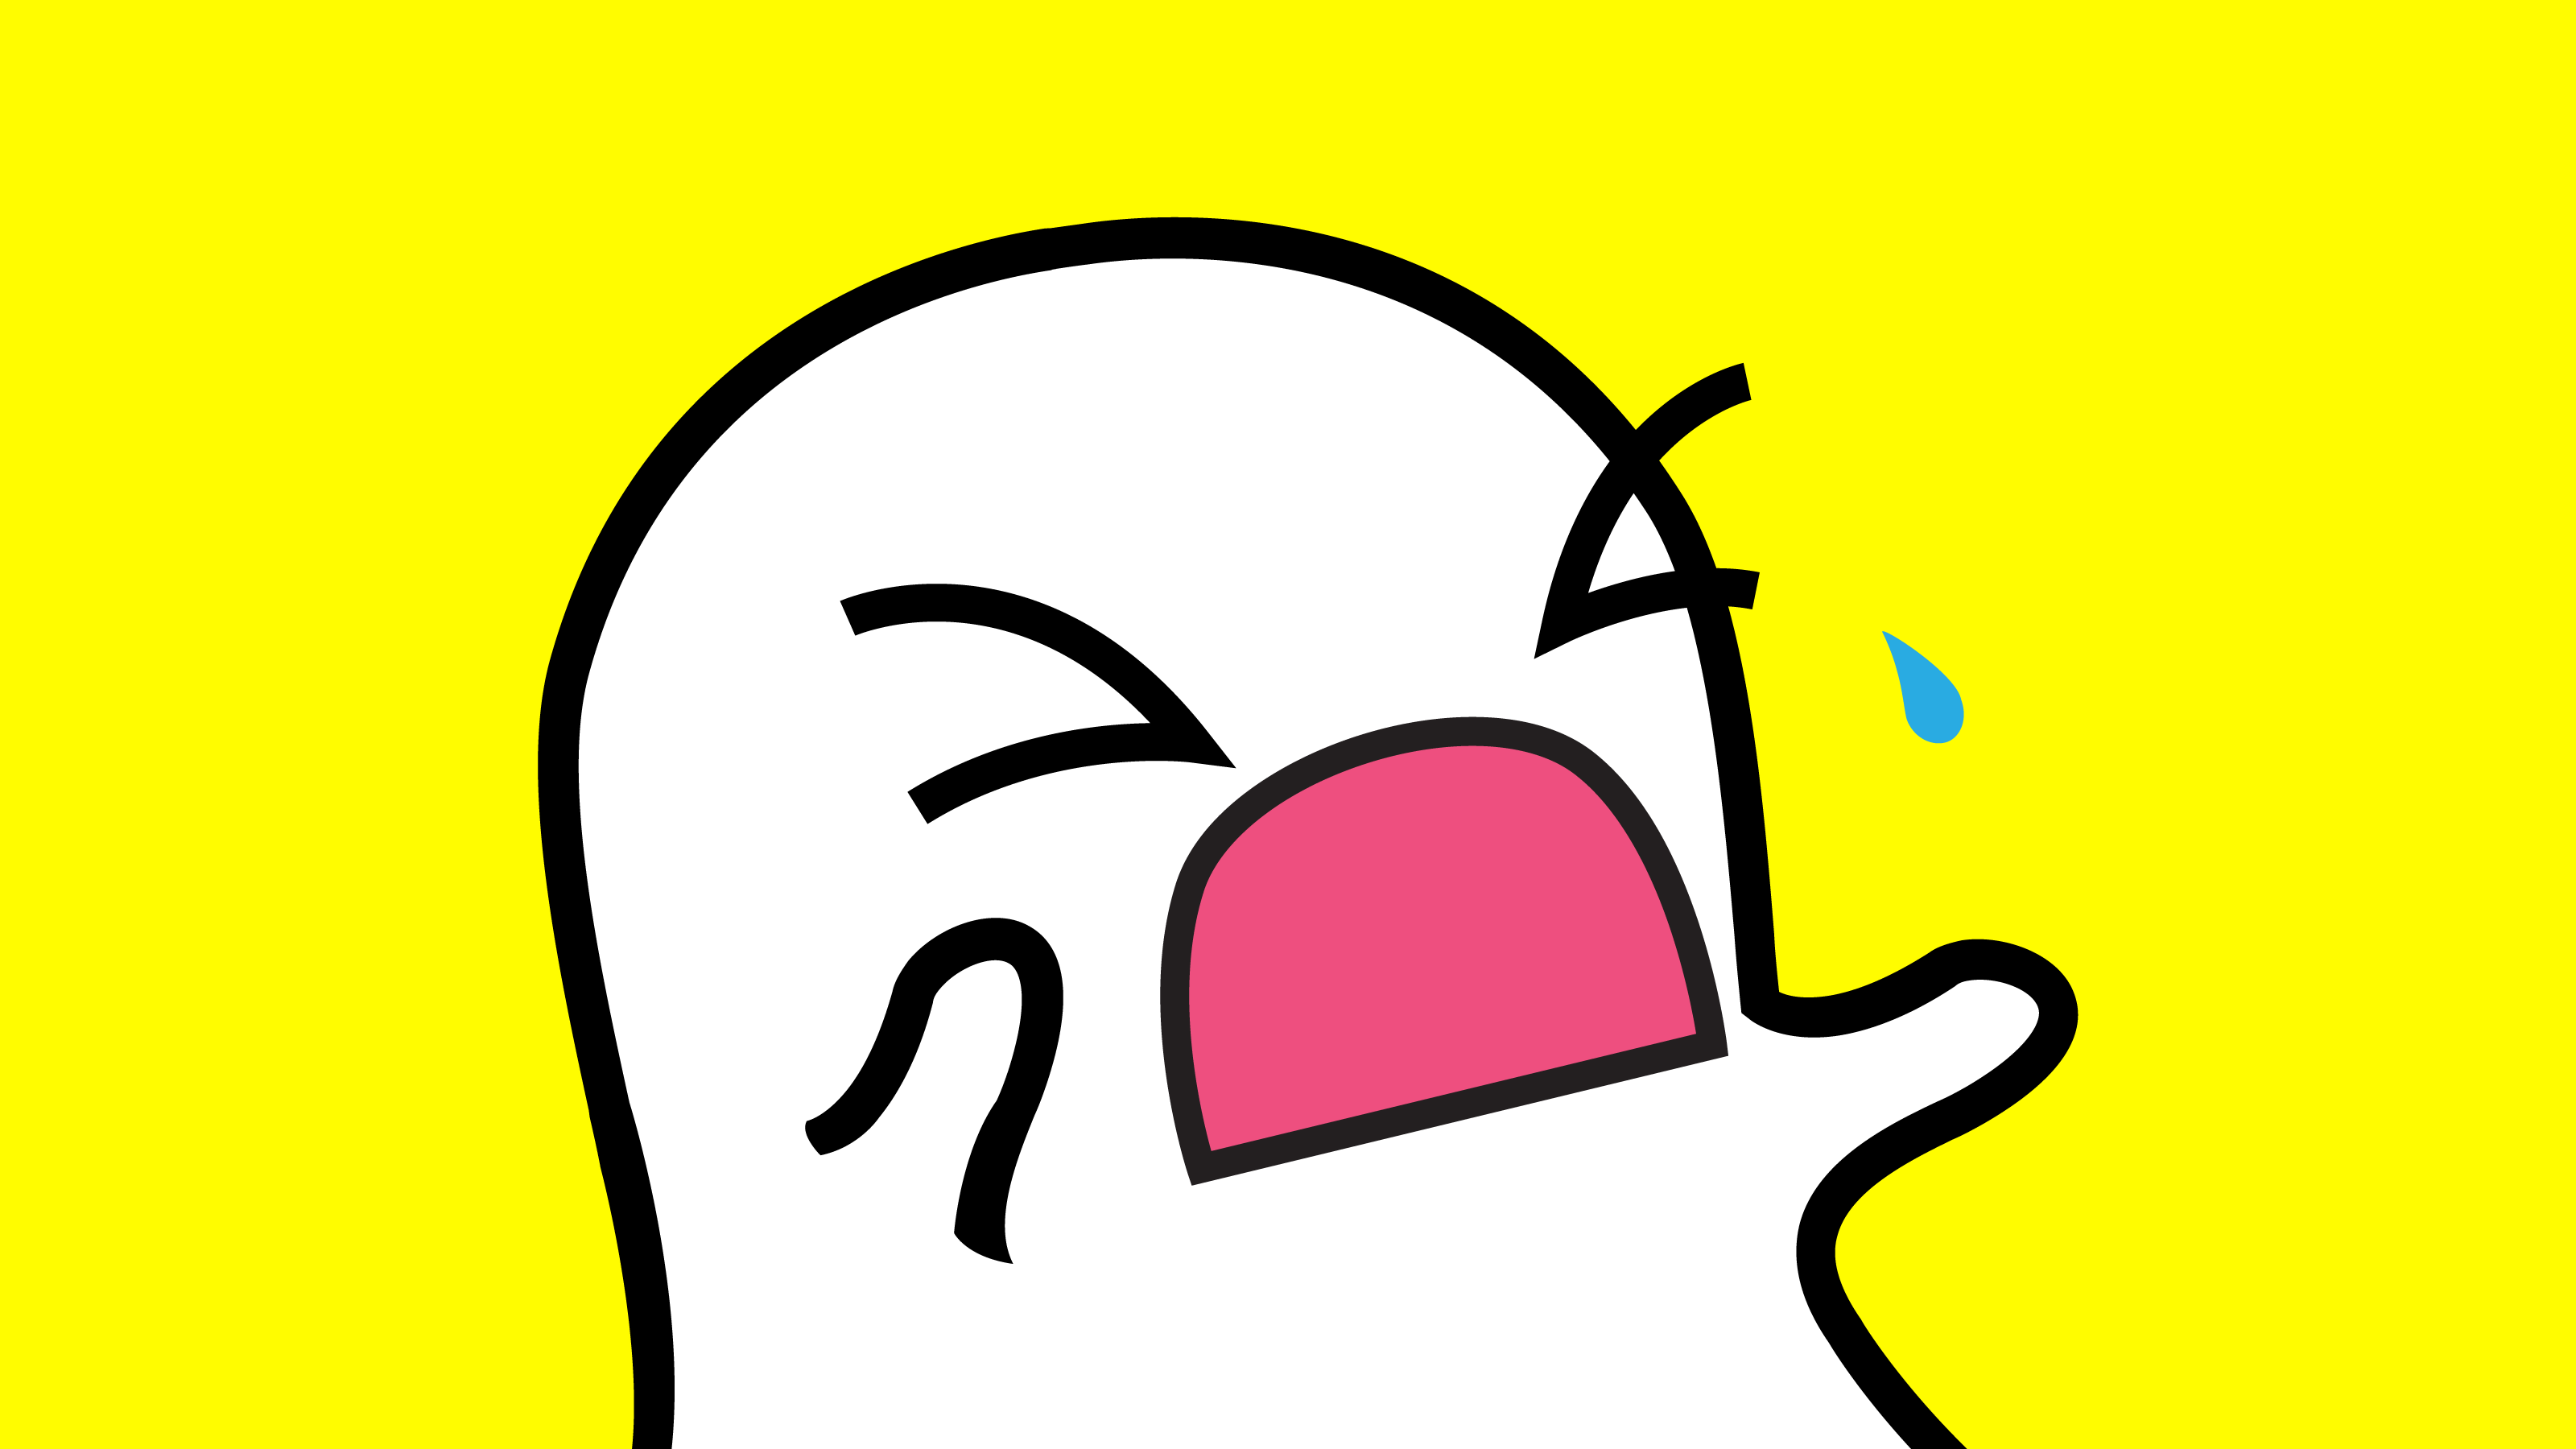 Snap Inc. lays off at least two dozen amid slowed user growth and engagement